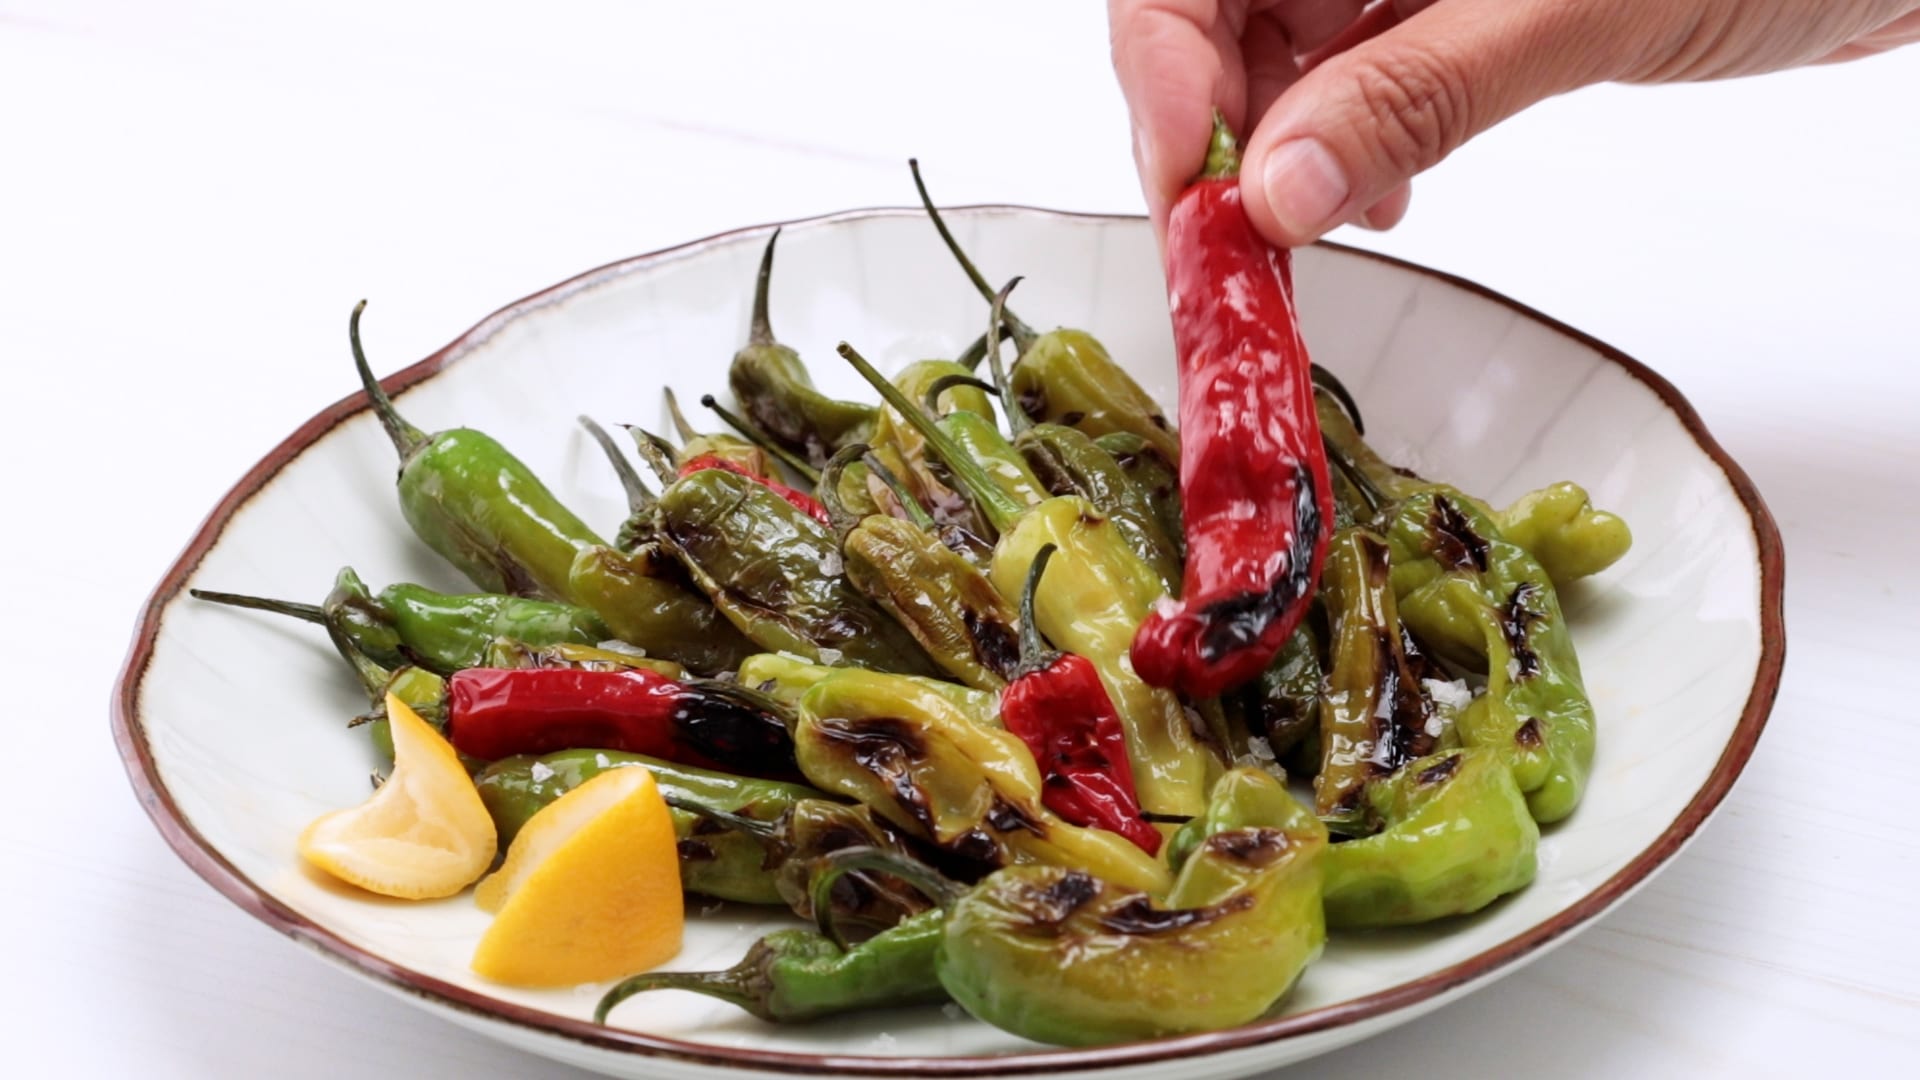 hand picking up a flash-fried blistered shishito pepper from a serving plate